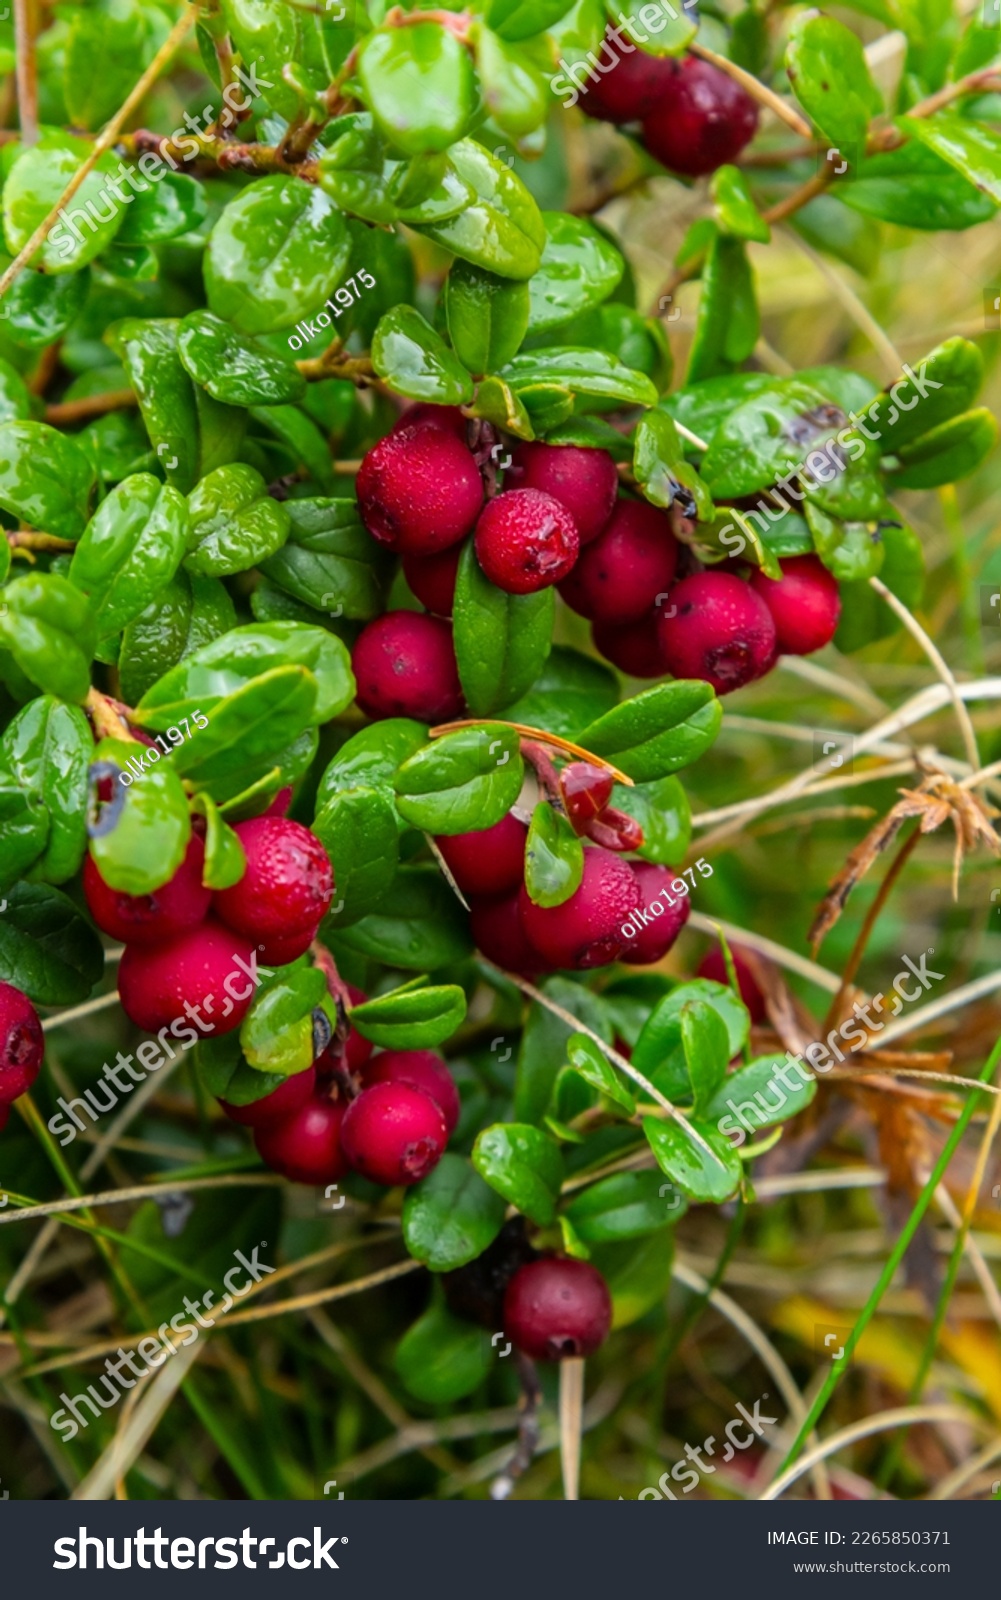 Vaccinium vitis-idaea lingonberry, partridgeberry, or cowberry is a short evergreen shrub in the heath family that bears edible fruit. #2265850371